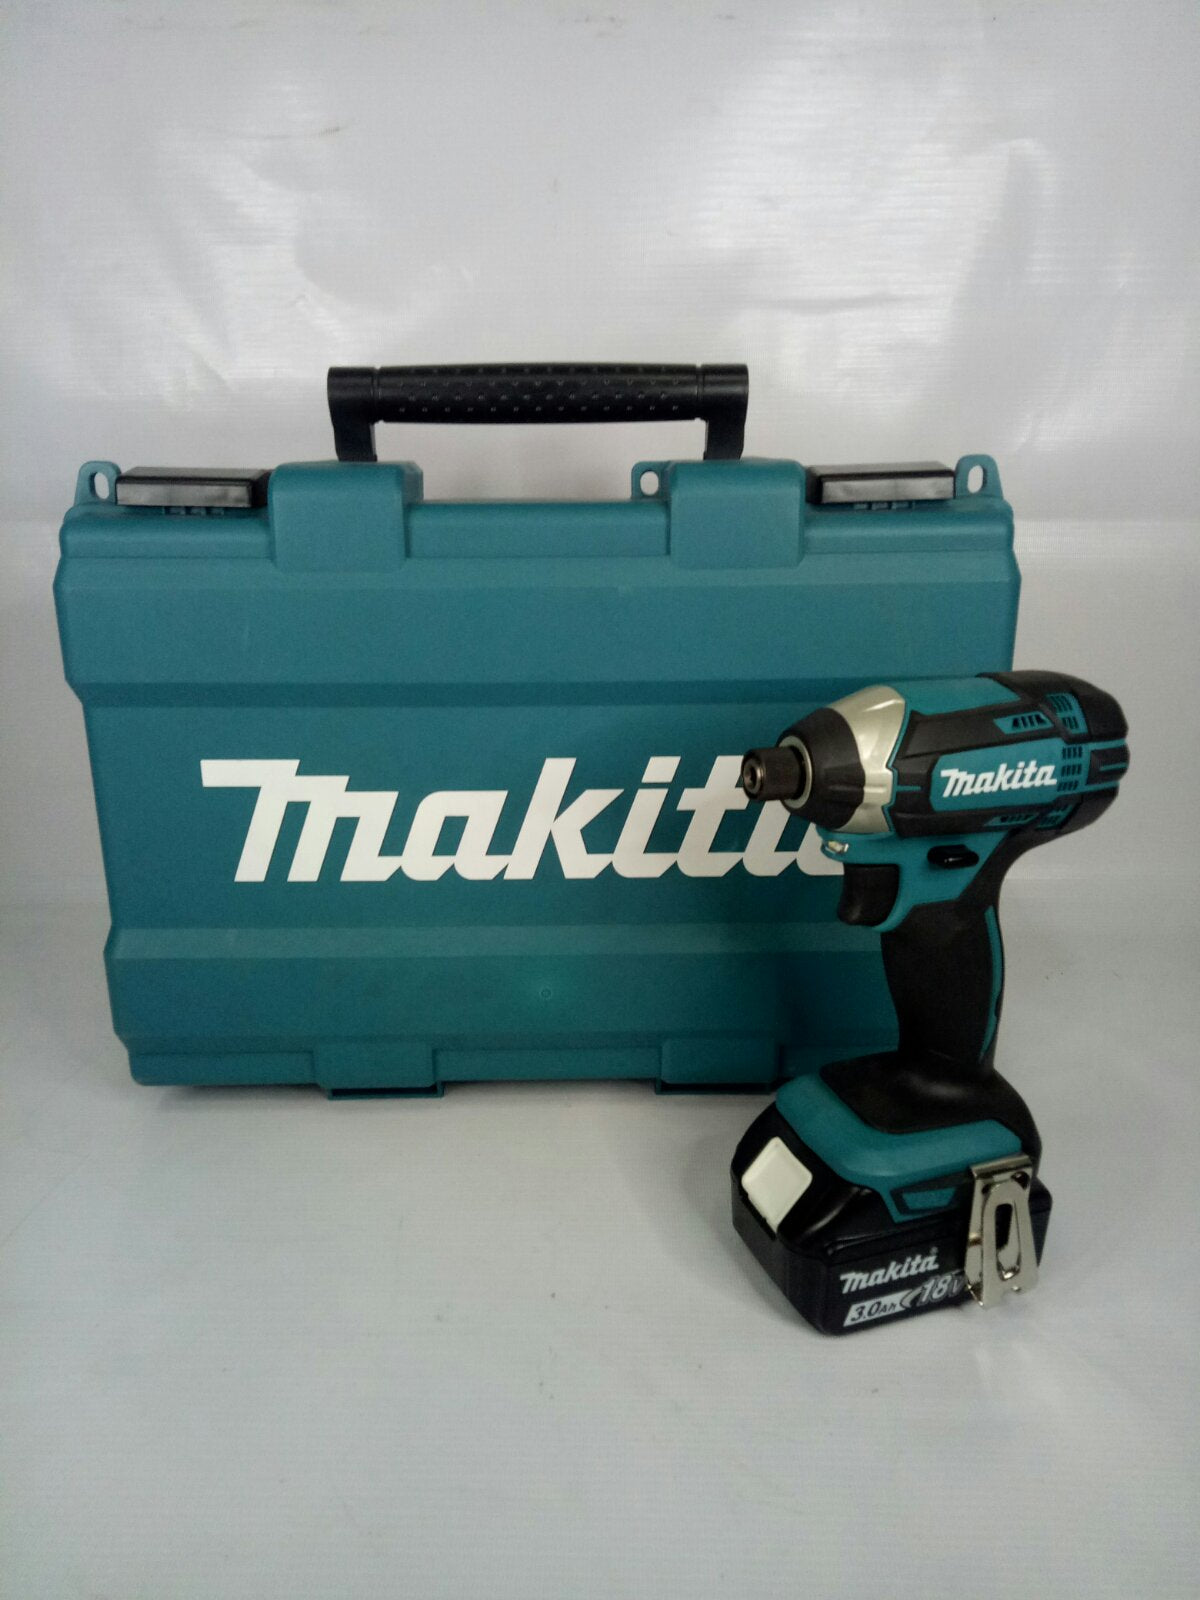 MAKITA DTD152RF 165 N·m Cordless Impact Driver 18V LXT® Li-Ion [Kit] (1/4″) with Battery and Charger